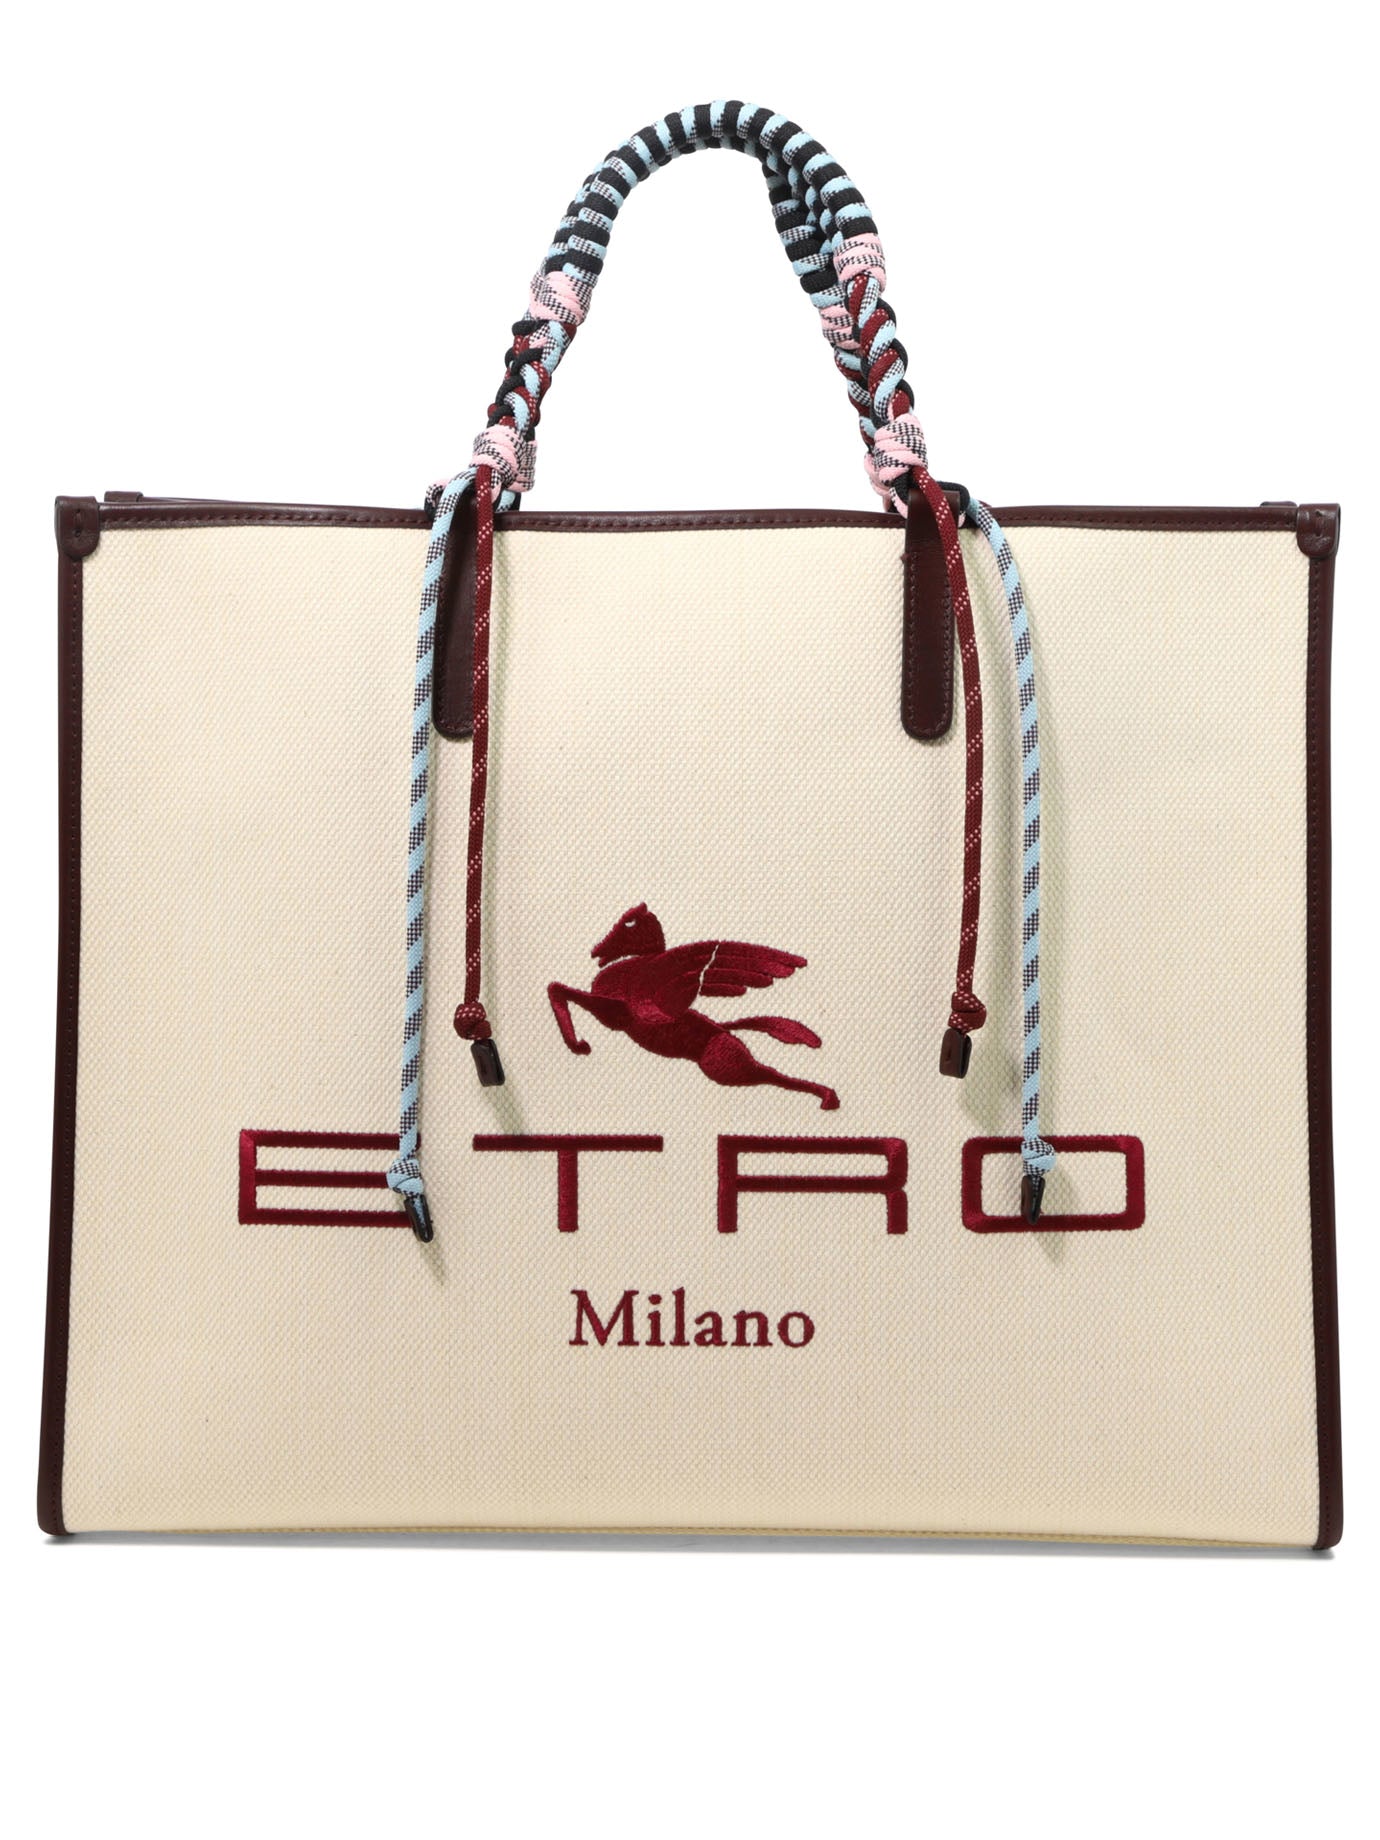 Authentic Red ETRO Handbag / Vintage Luxury Bag made in Italy